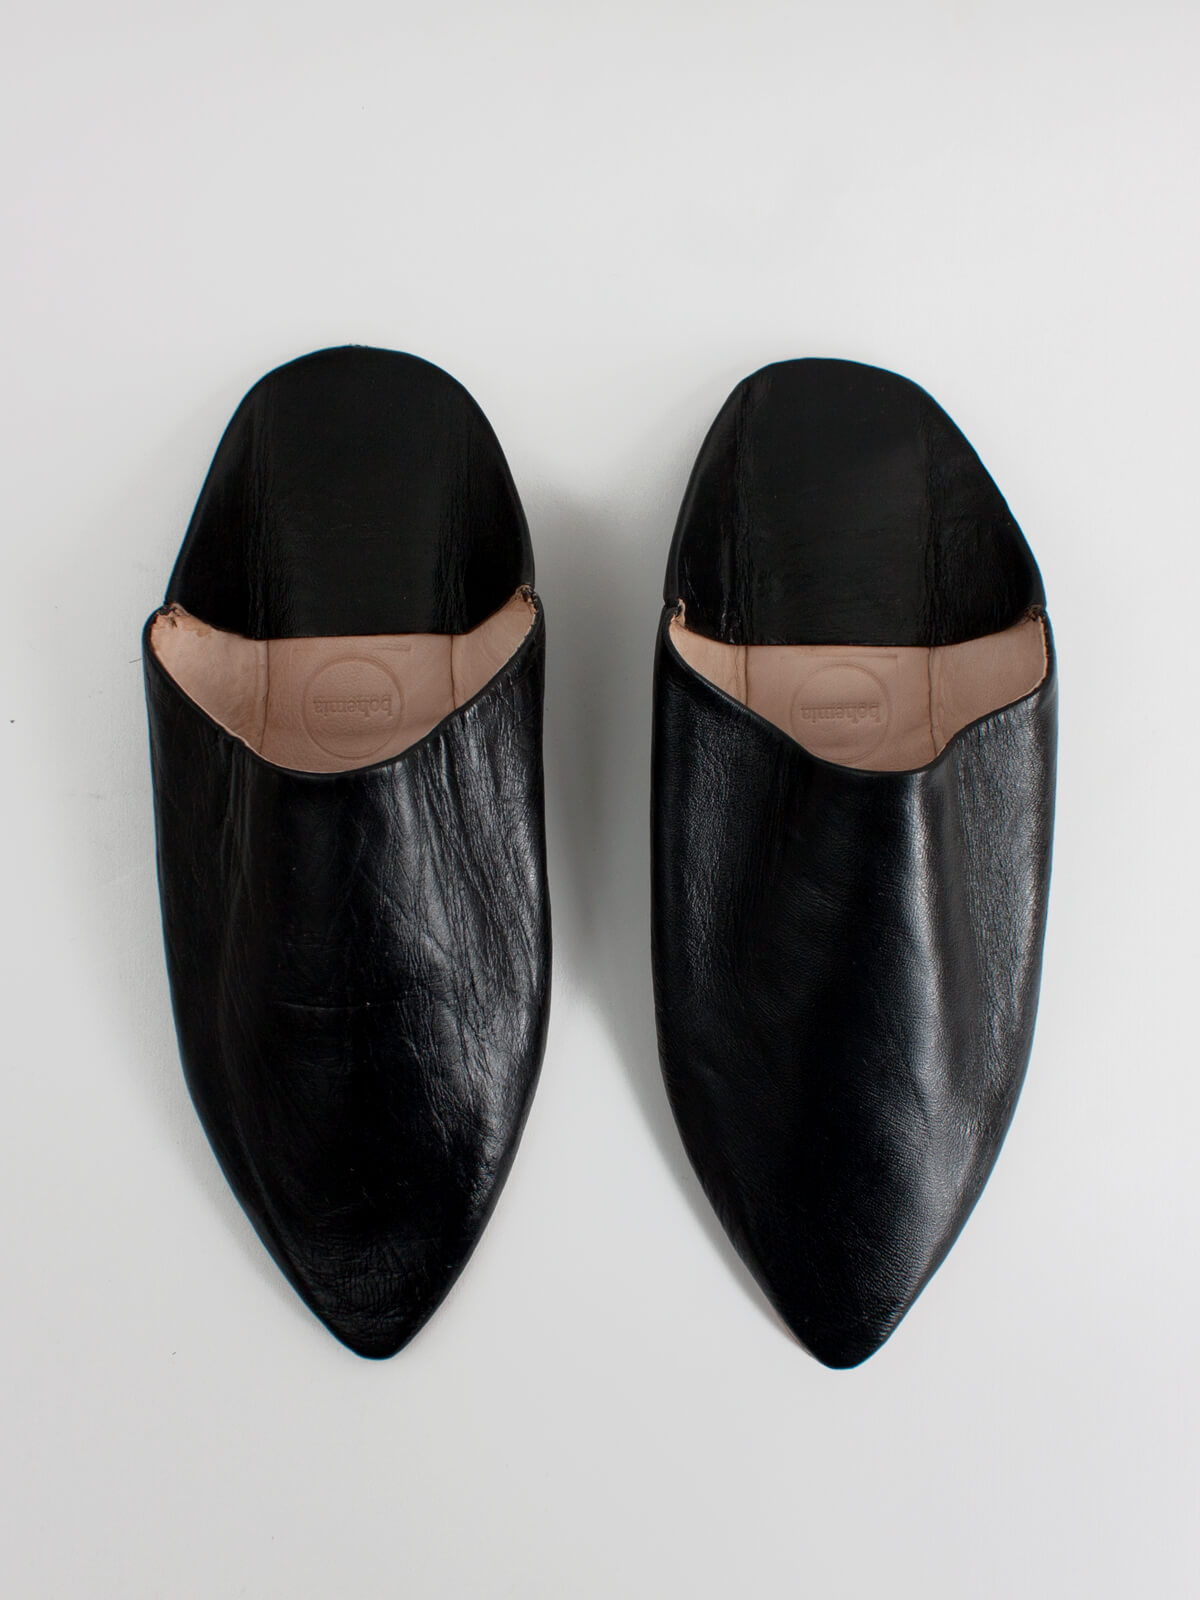 Moroccan Mens Pointed Babouche Slippers, Black